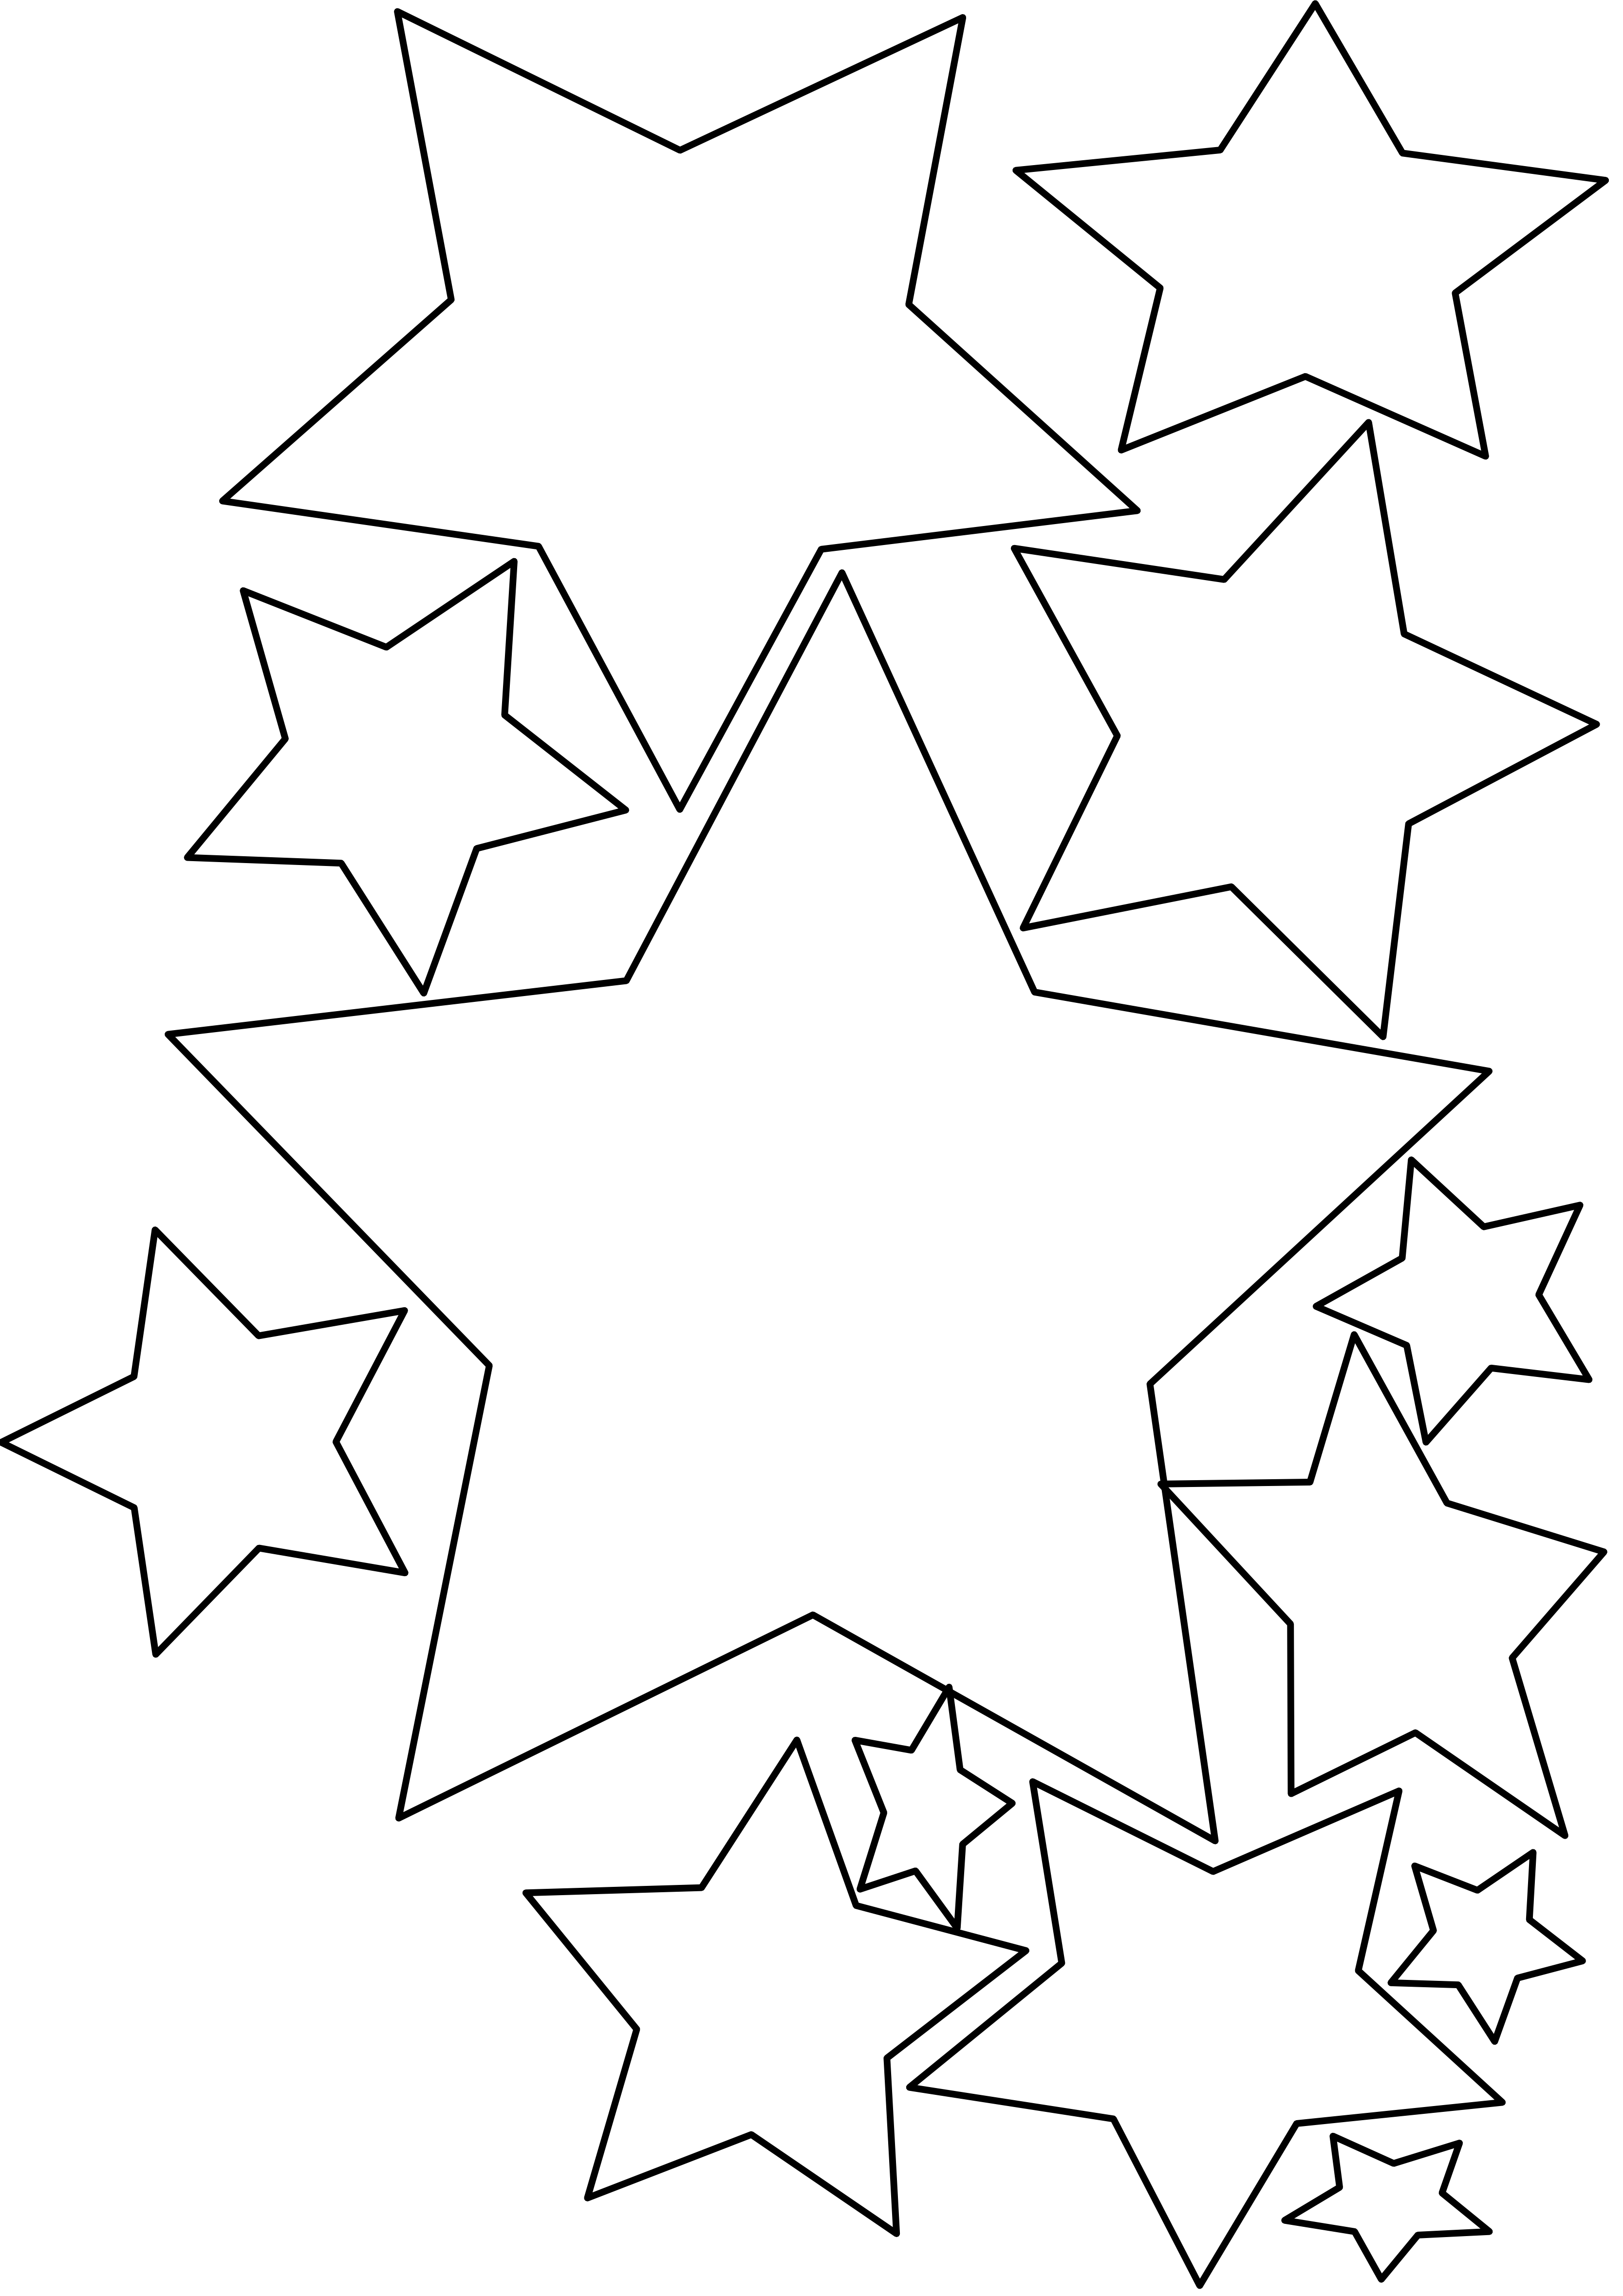 PNG Star Black And White - 60959